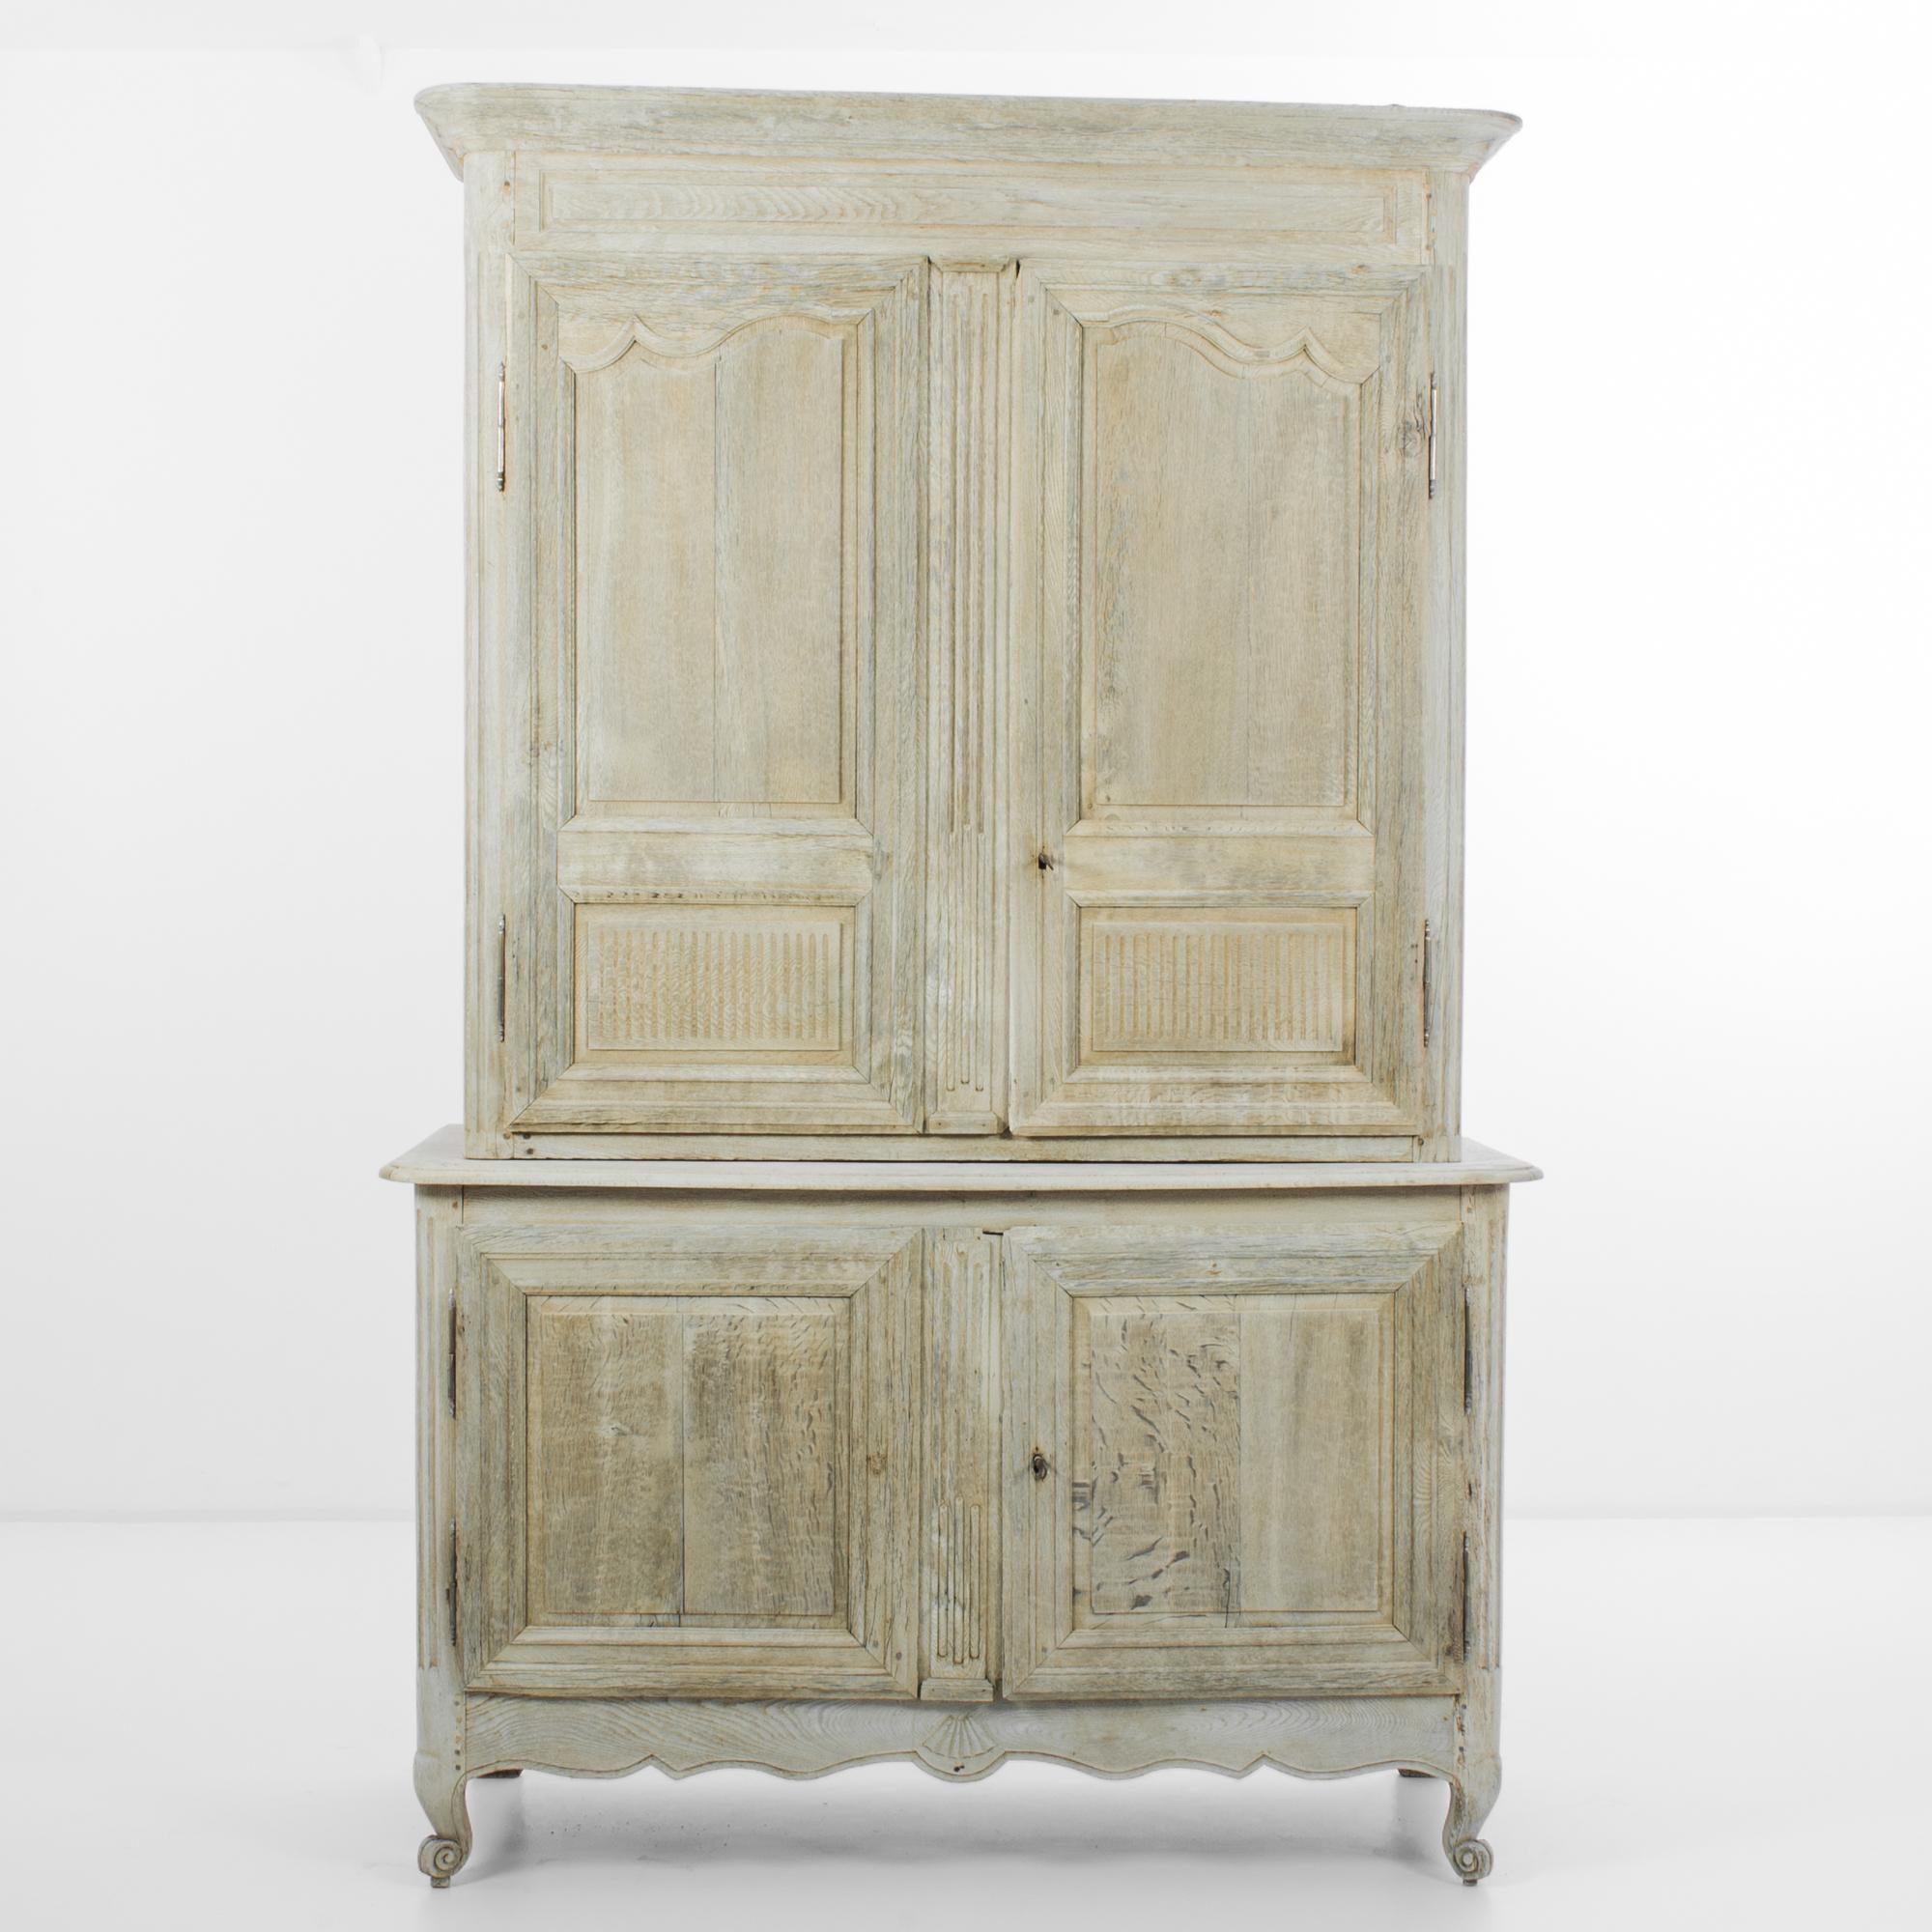 The quintessential French Provincial buffet cabinet, made circa 1800. The simple geometric shape recalls a countryside local and the time tested approach of regional French cabinet makers. Distinctive period design is highlighted by the unique